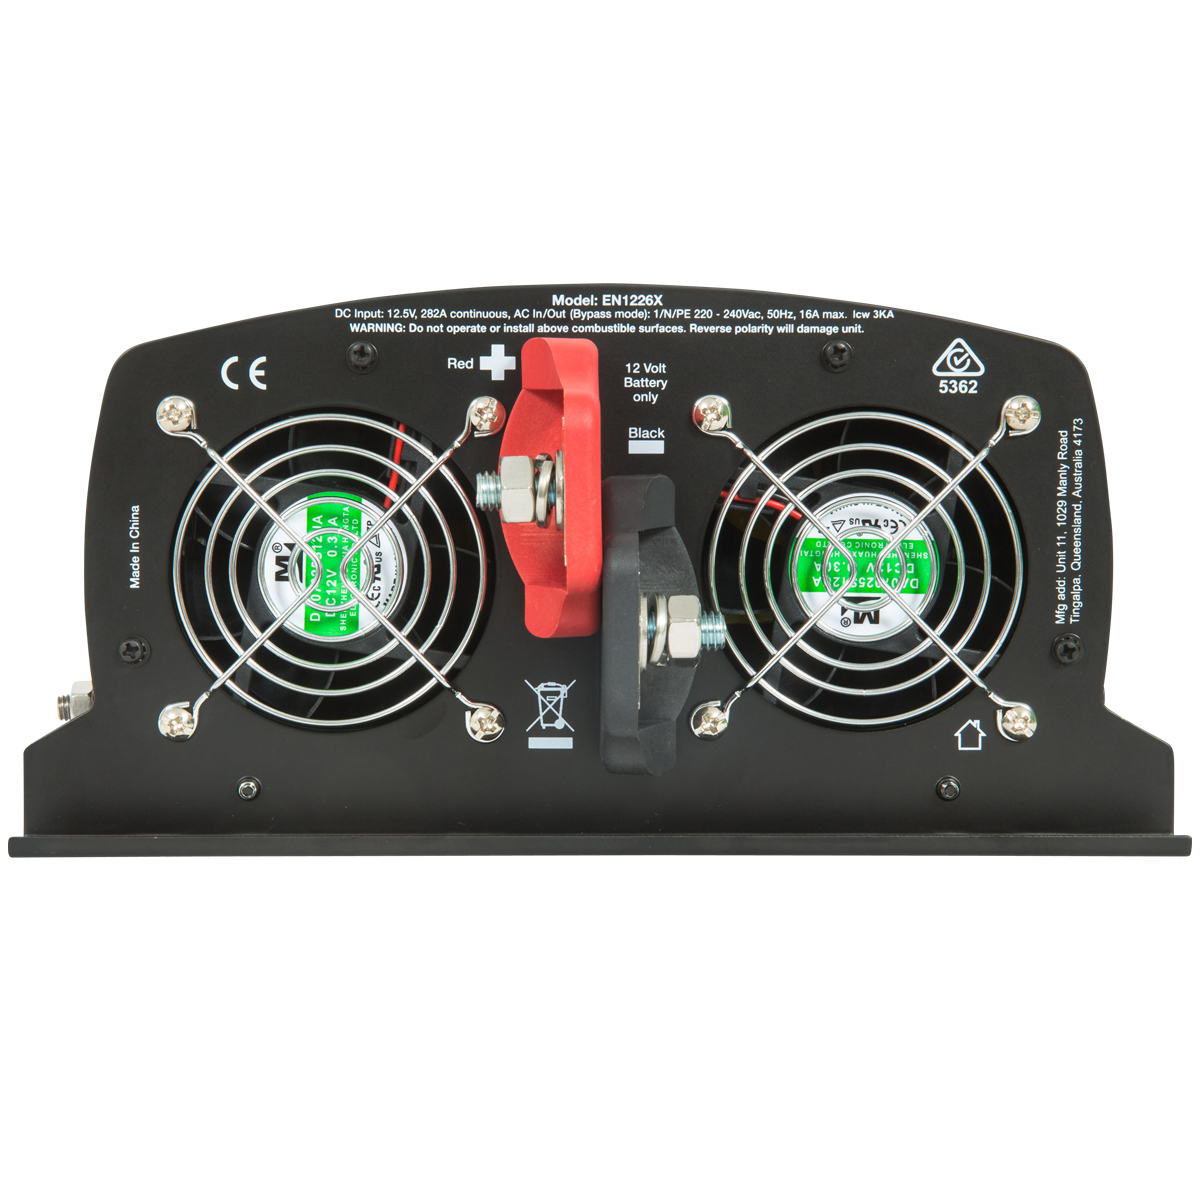 Epower 2600W-X Inverter + DC Cable Pack